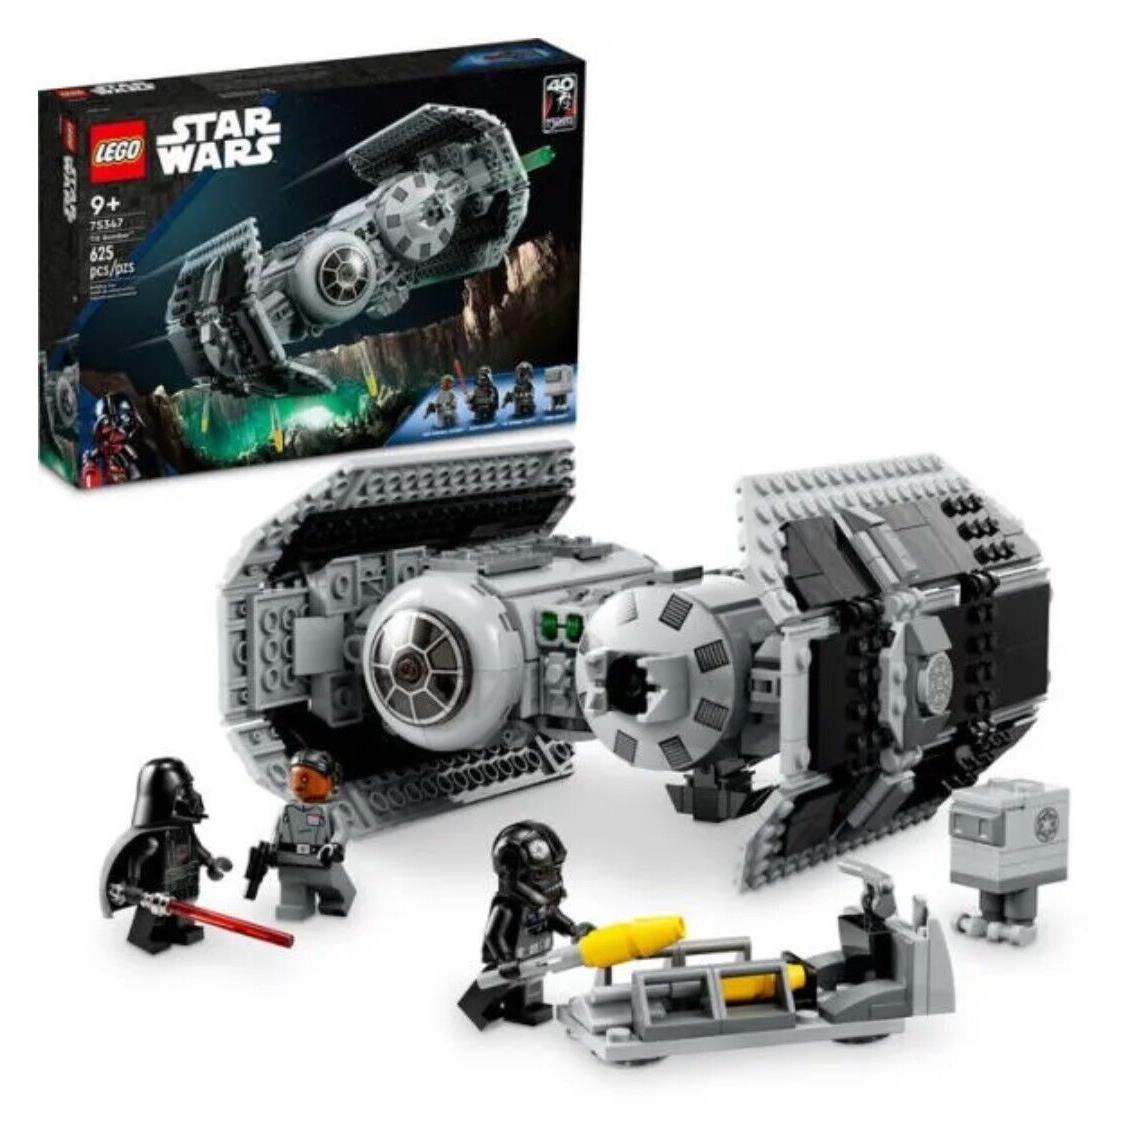 Lego Star Wars Tie Bomber 75347 Building Set - Free Expedited Shipping